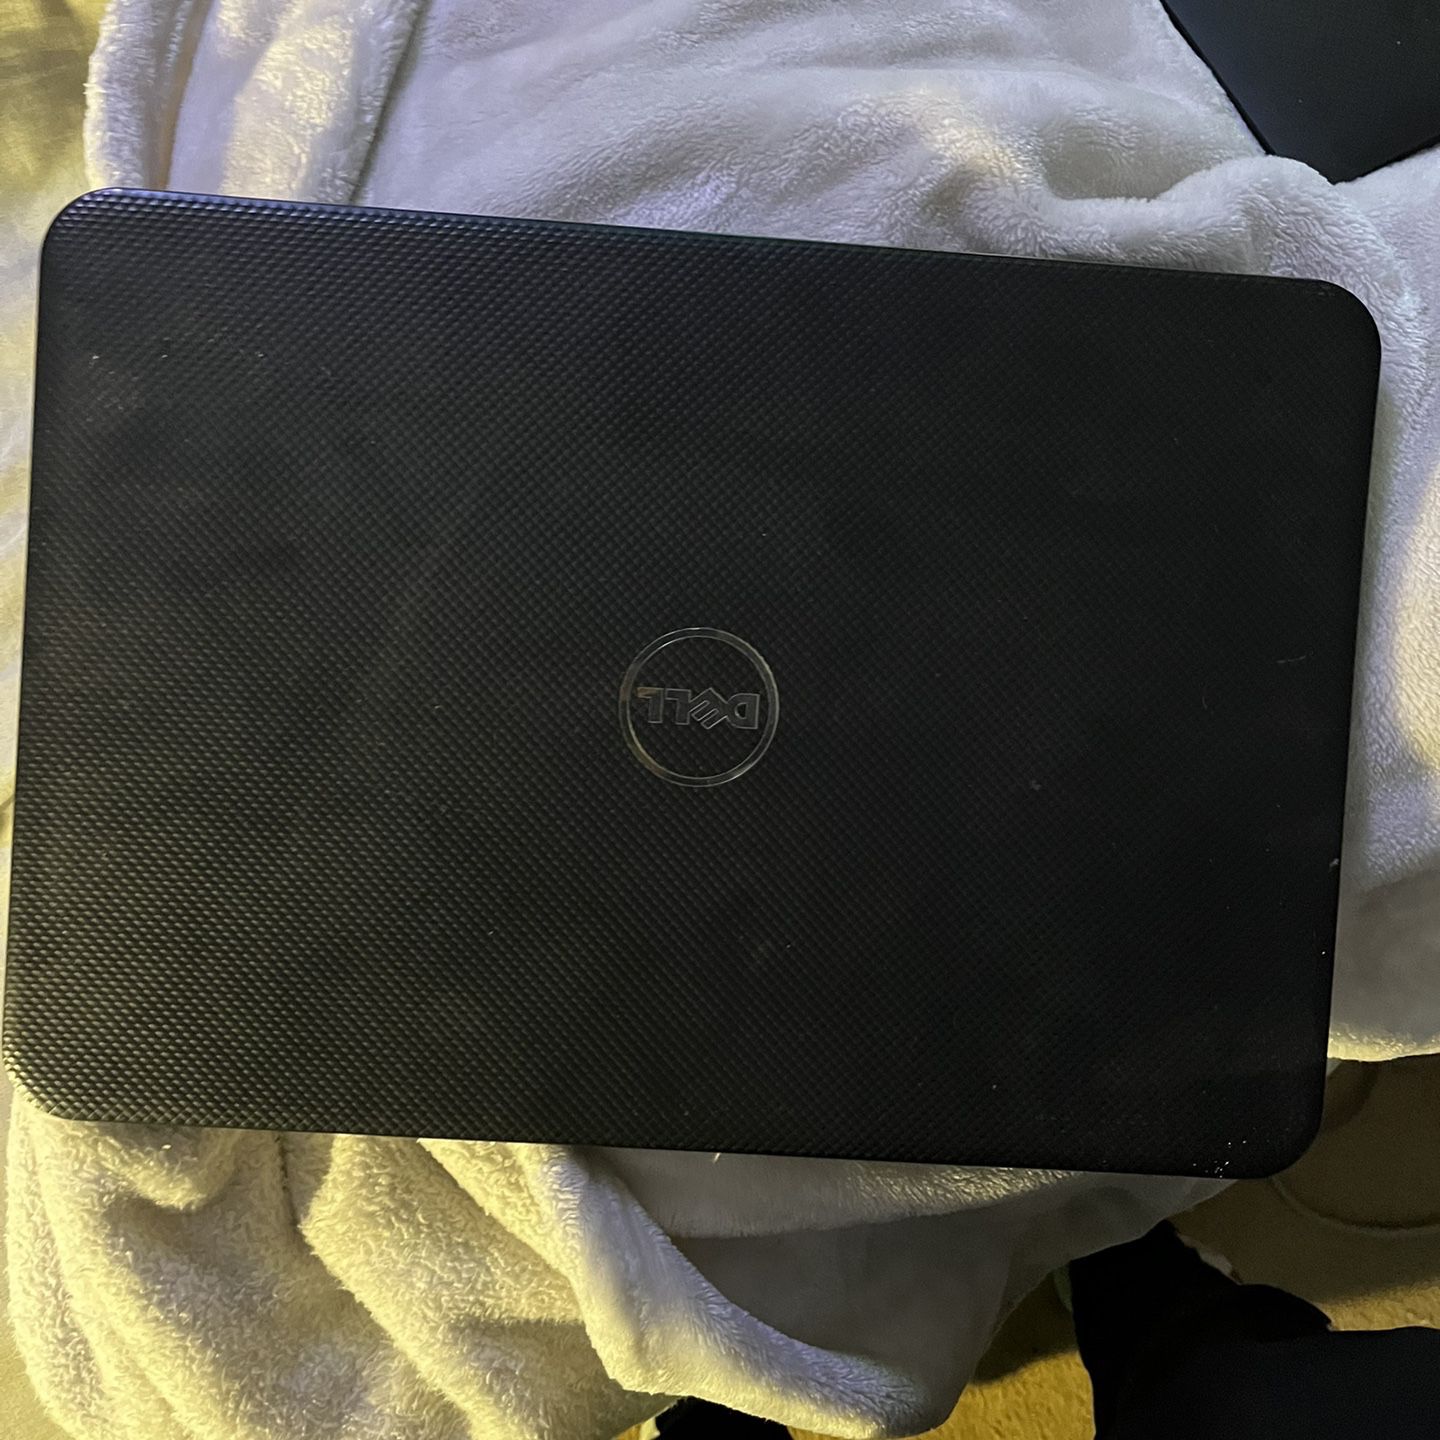 DELL 18” Notebook (Missing Charger)